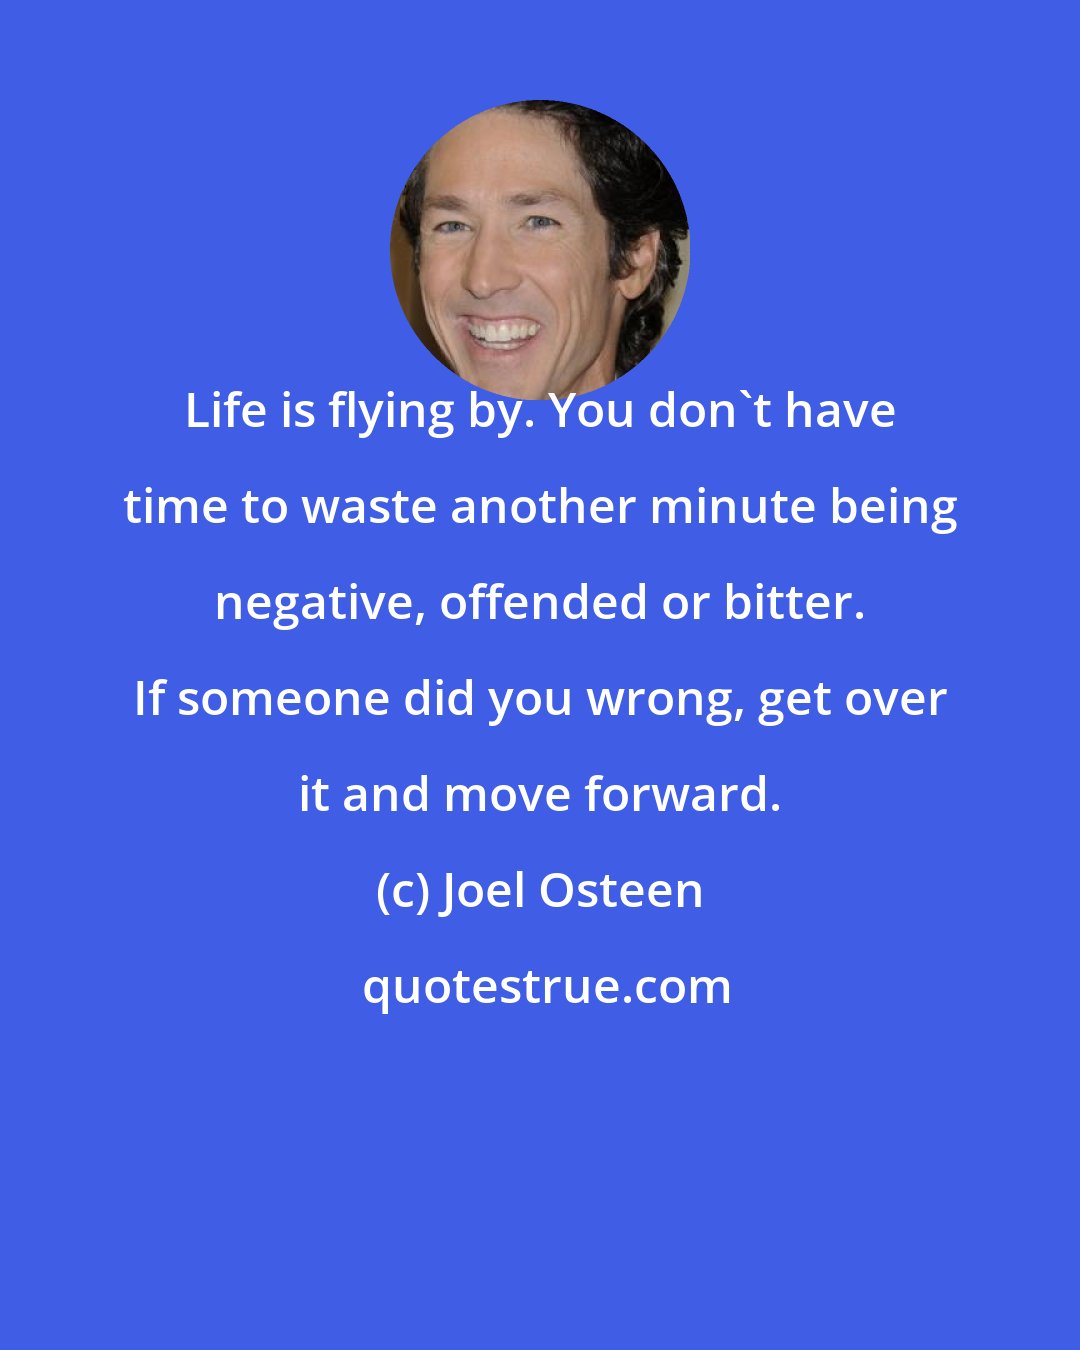 Joel Osteen: Life is flying by. You don't have time to waste another minute being negative, offended or bitter. If someone did you wrong, get over it and move forward.